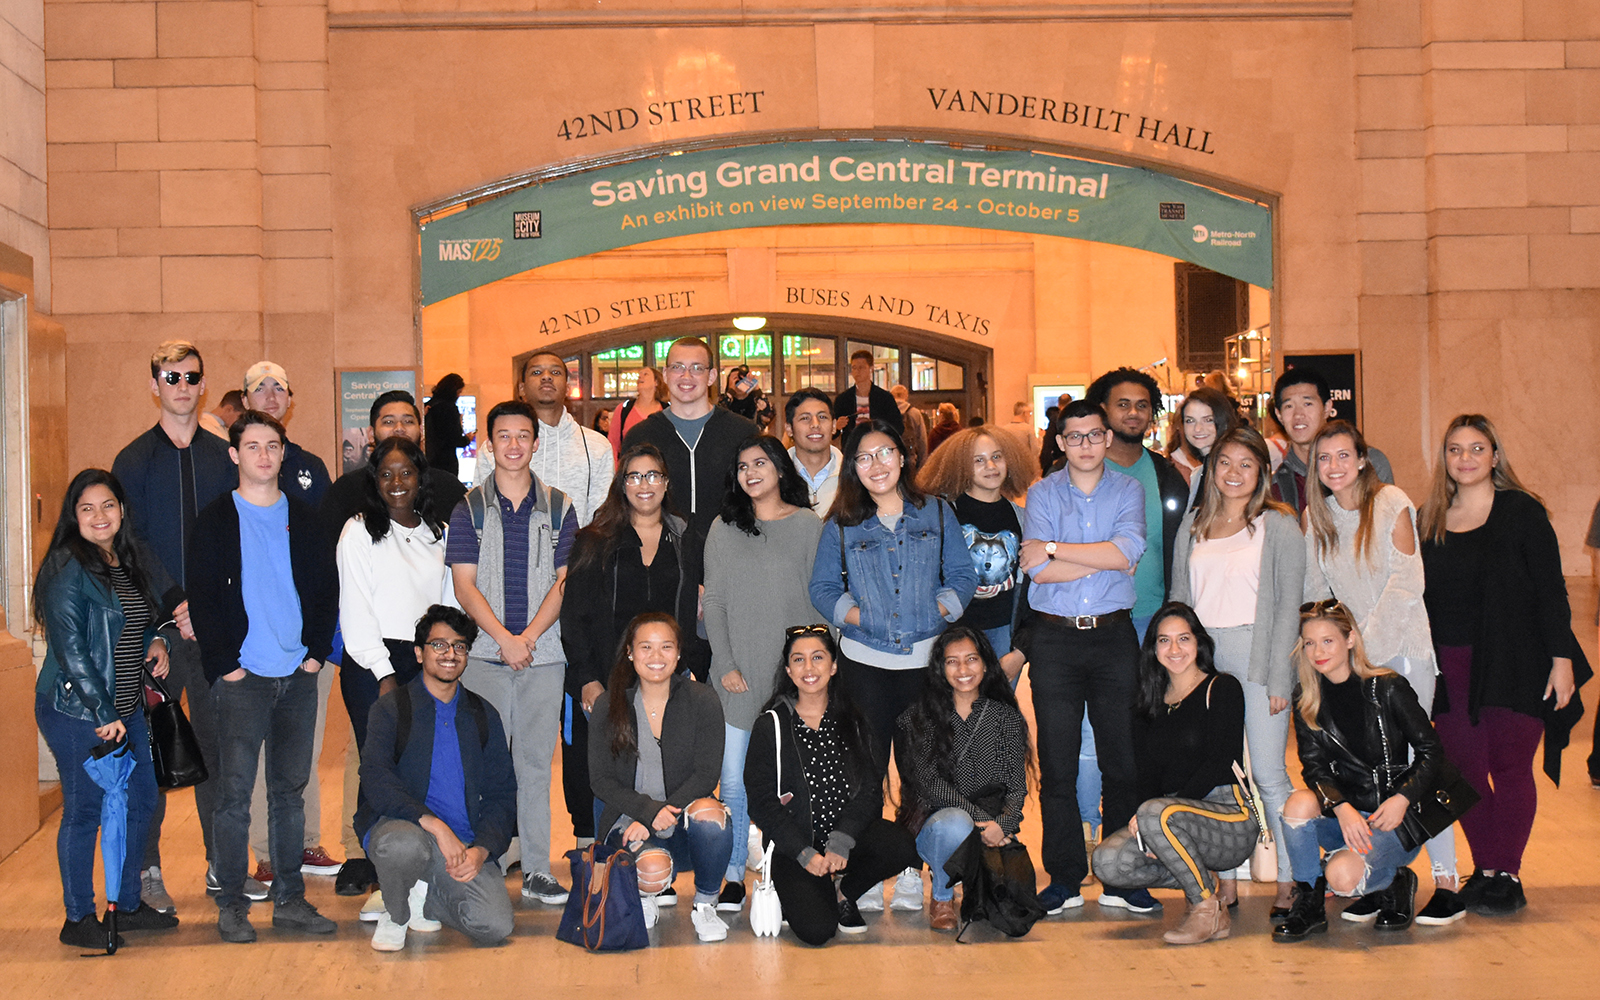 BCLC Students from UConn Stamford arriving in Grand Central Station in NYC, on their way to visit the set of Shark Tank (Courtesy BCLC)